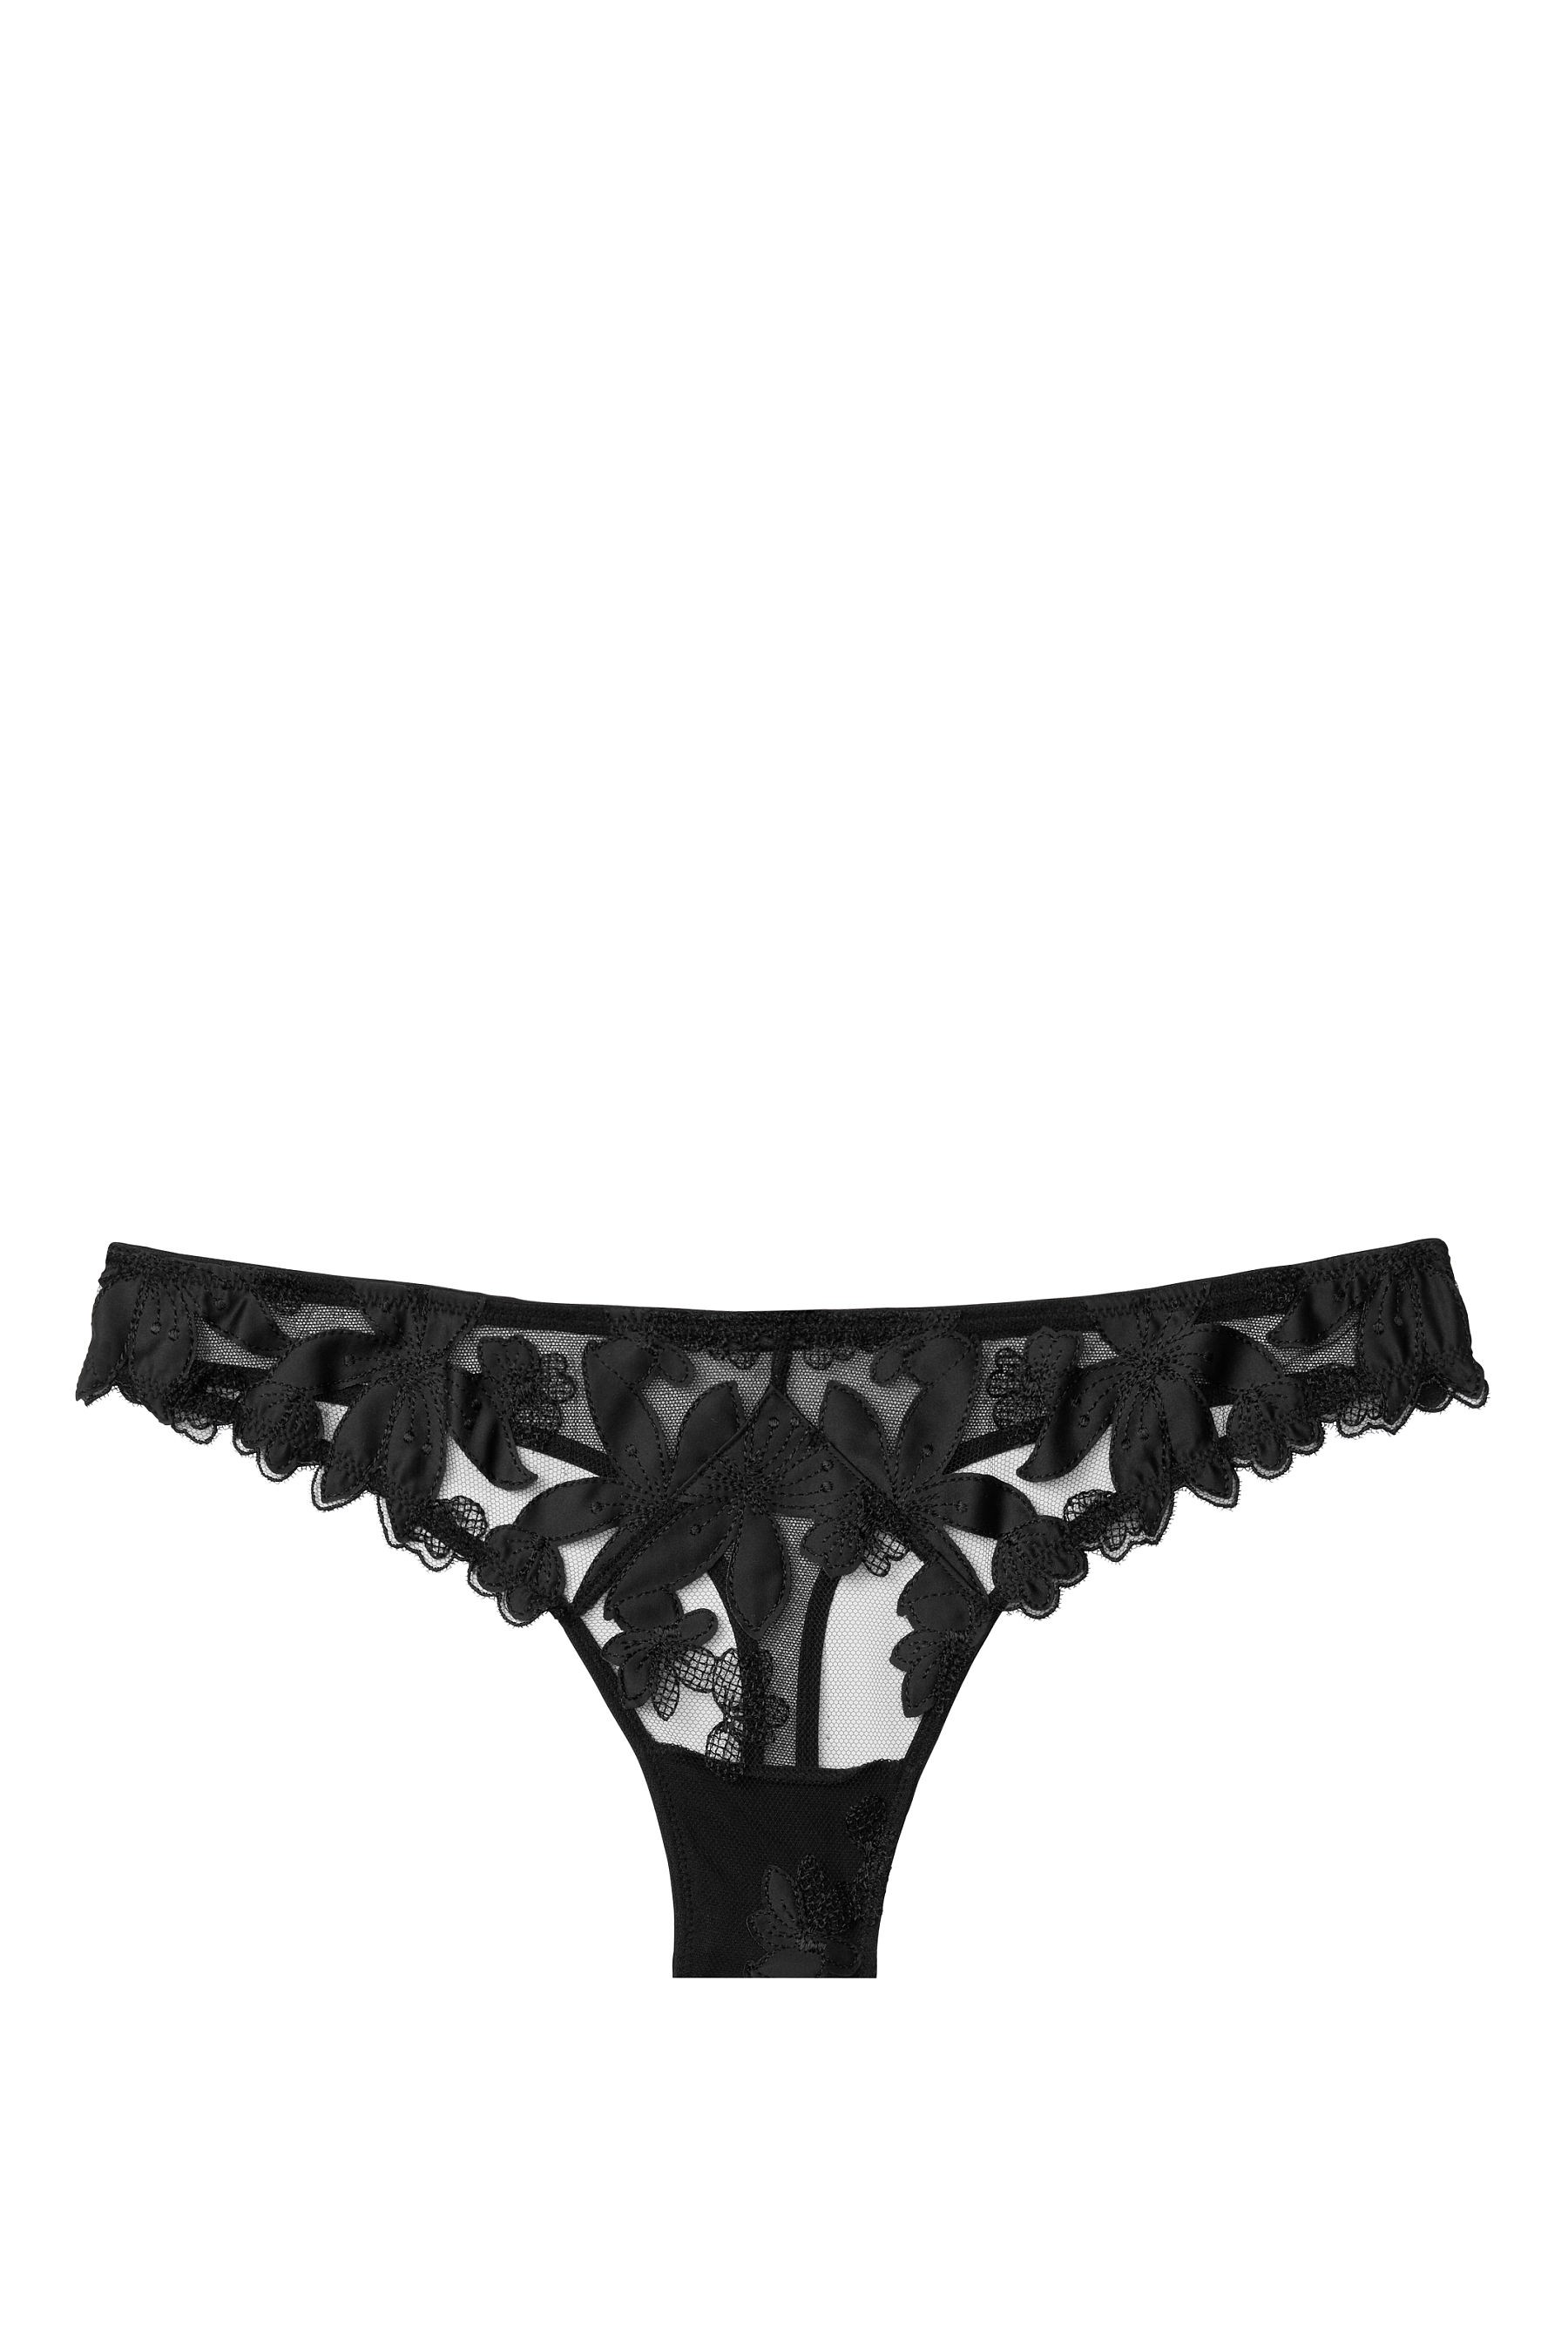 Buy Victoria's Secret Embroidered Thong Knickers from the Victoria's ...